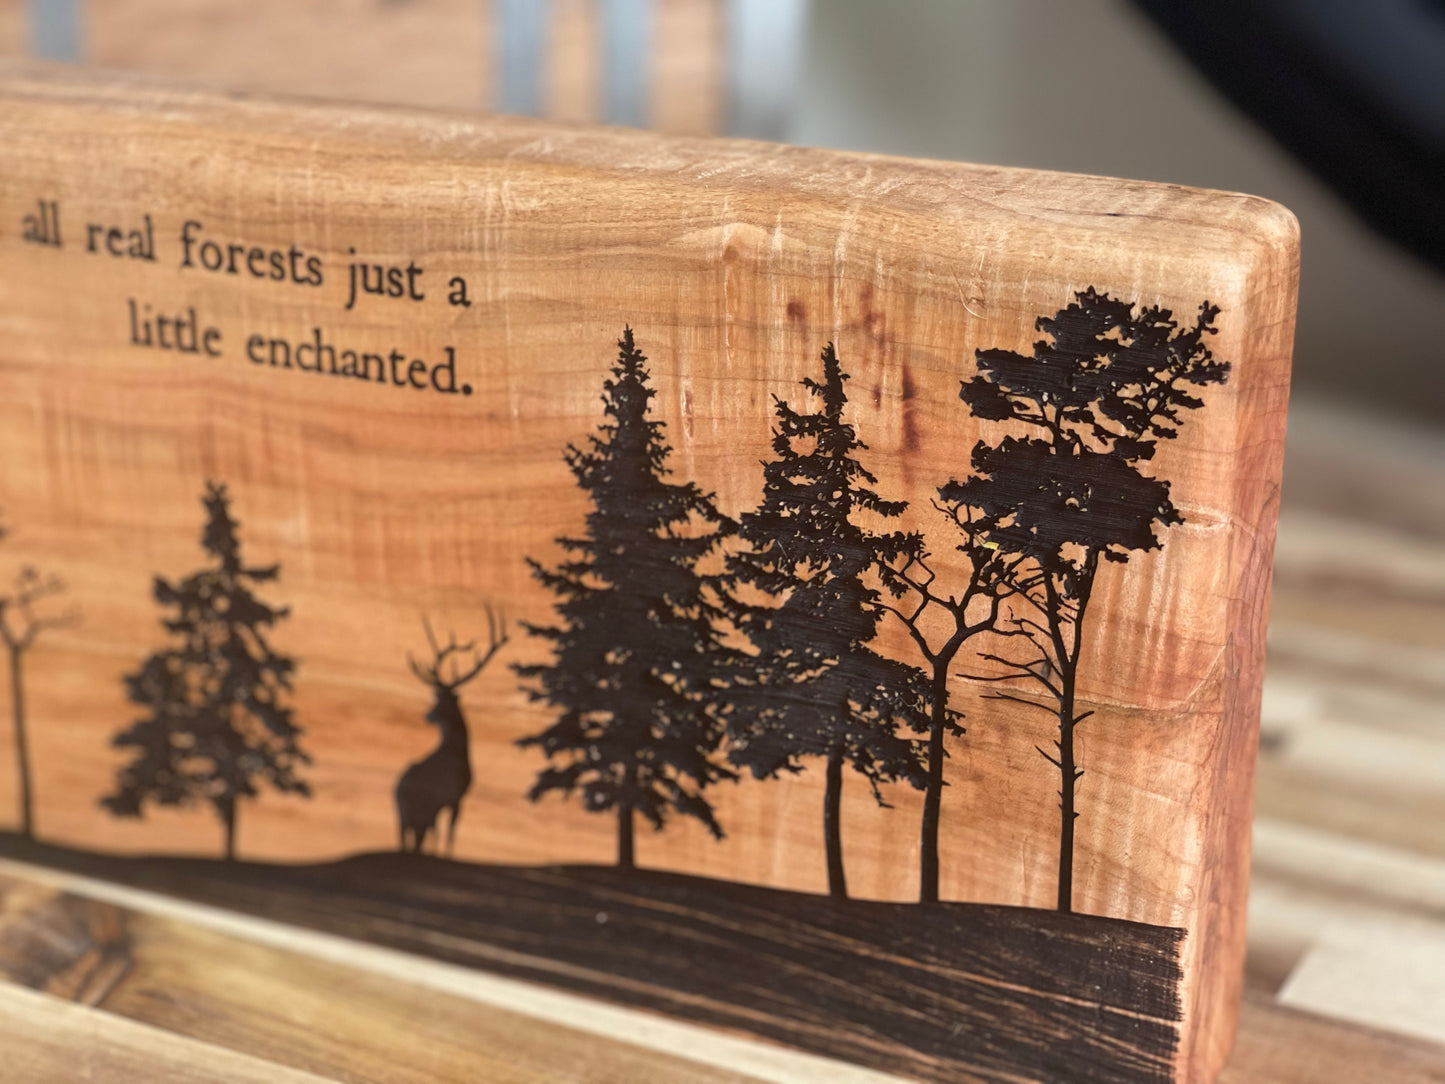 Books make all real forest just a little enchanted